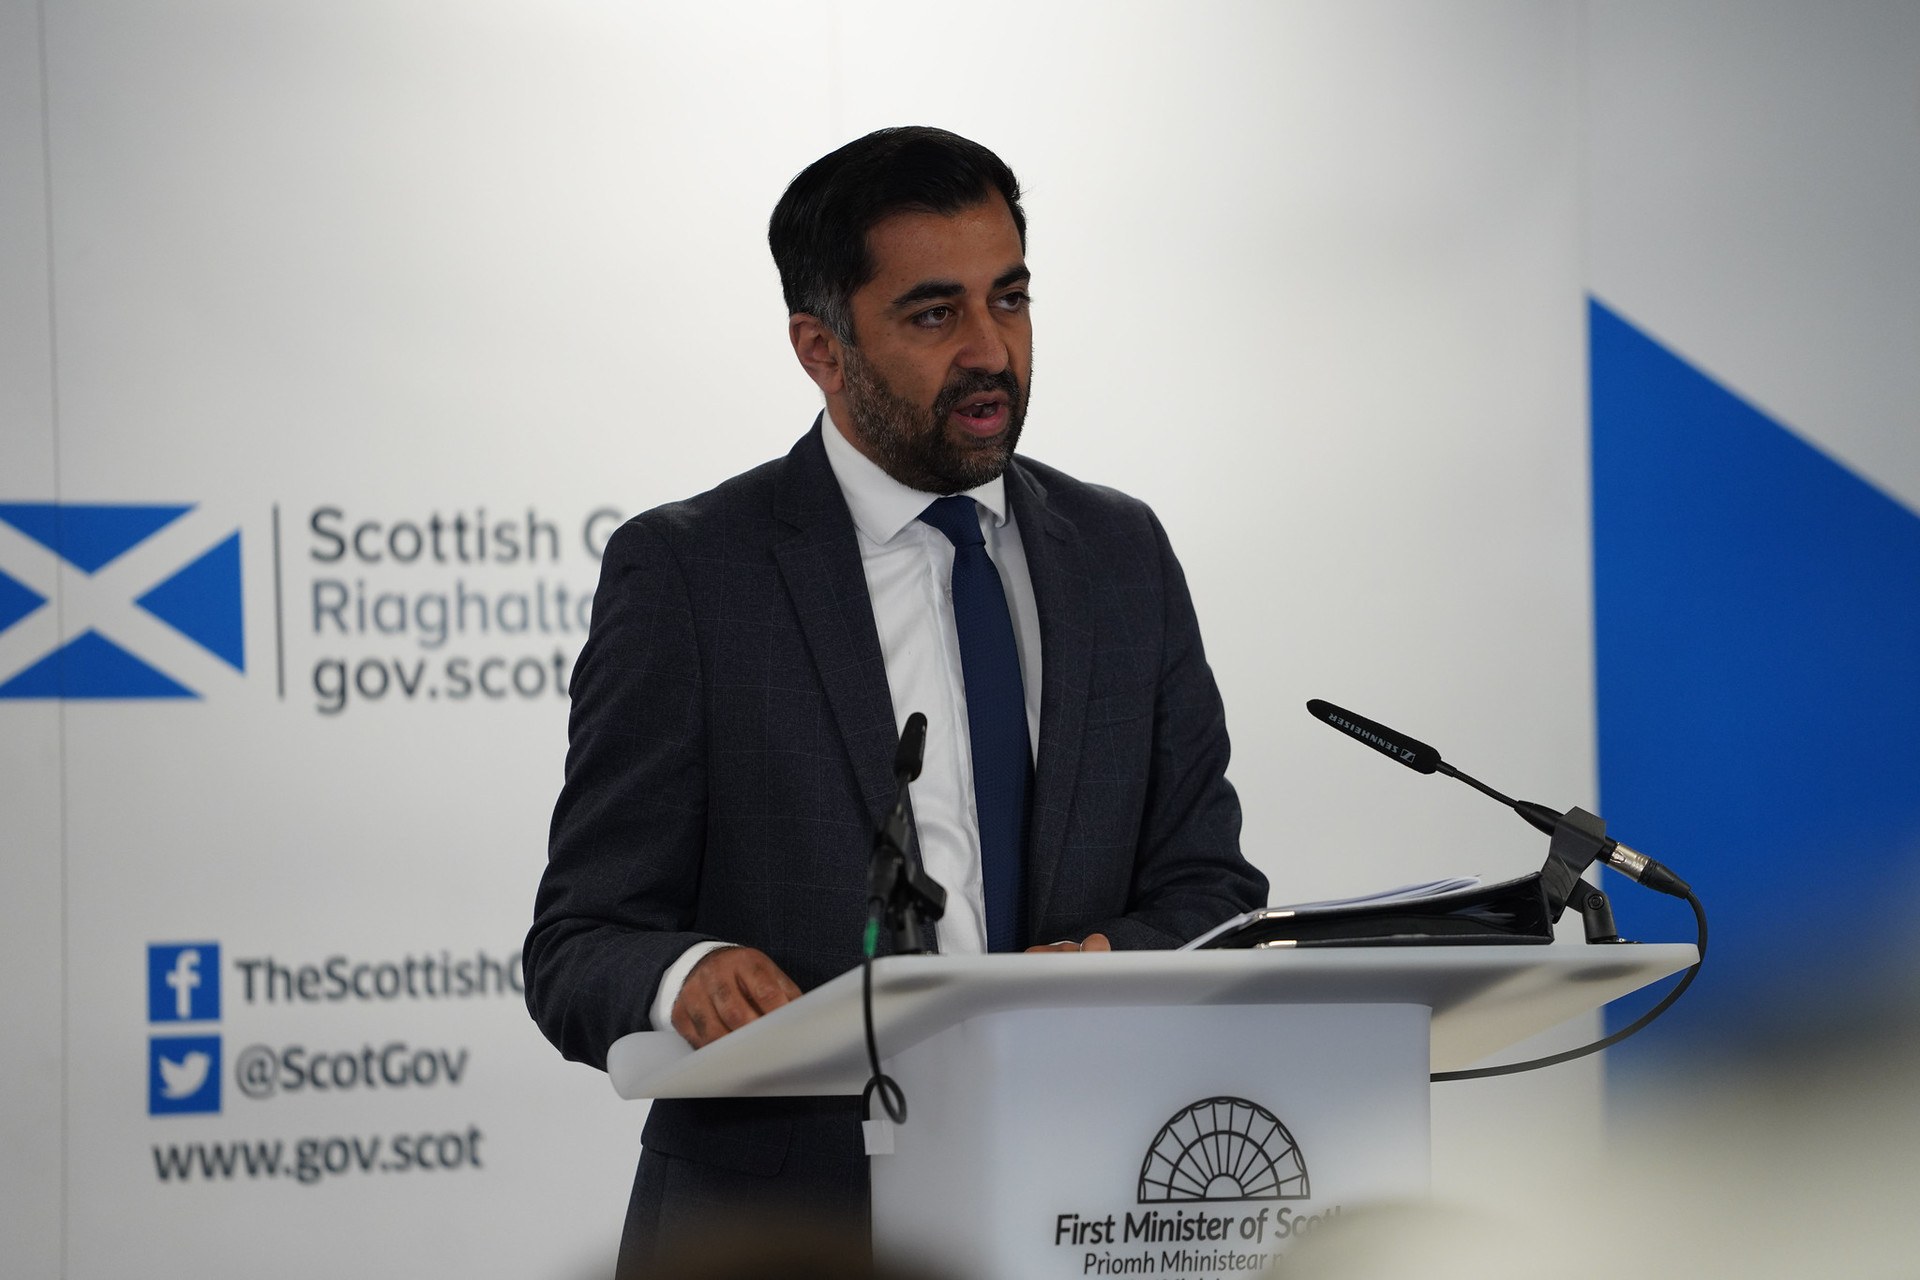 Humza Yousaf will give the ending speech at the SNP conference on Tuesday.